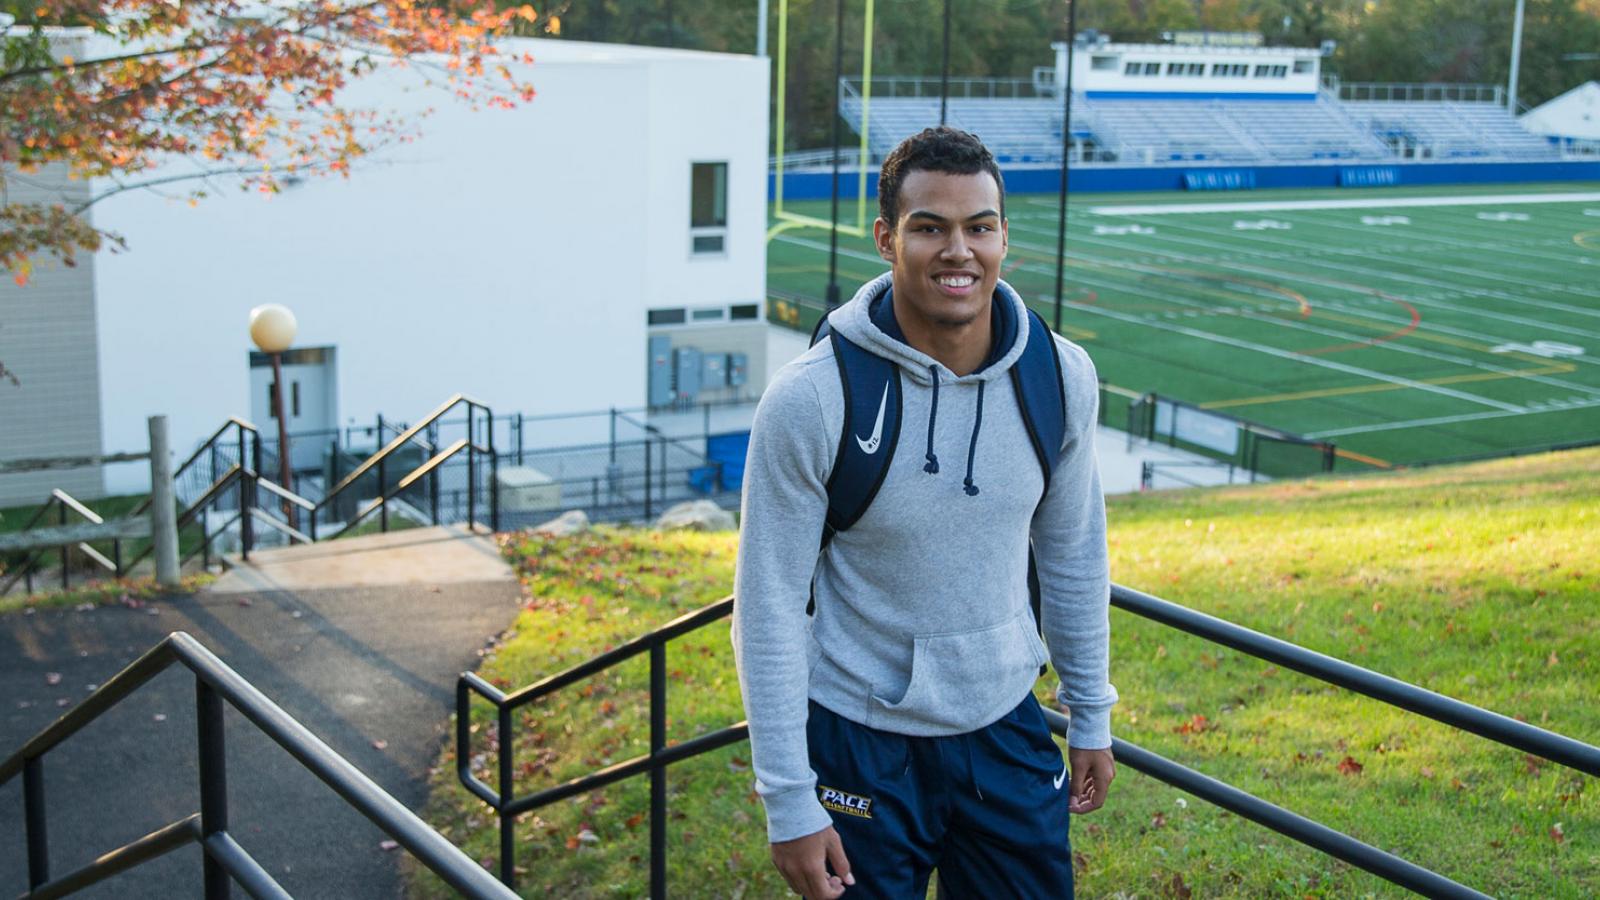 Student athlete leaving the football field on the Westchester campus.